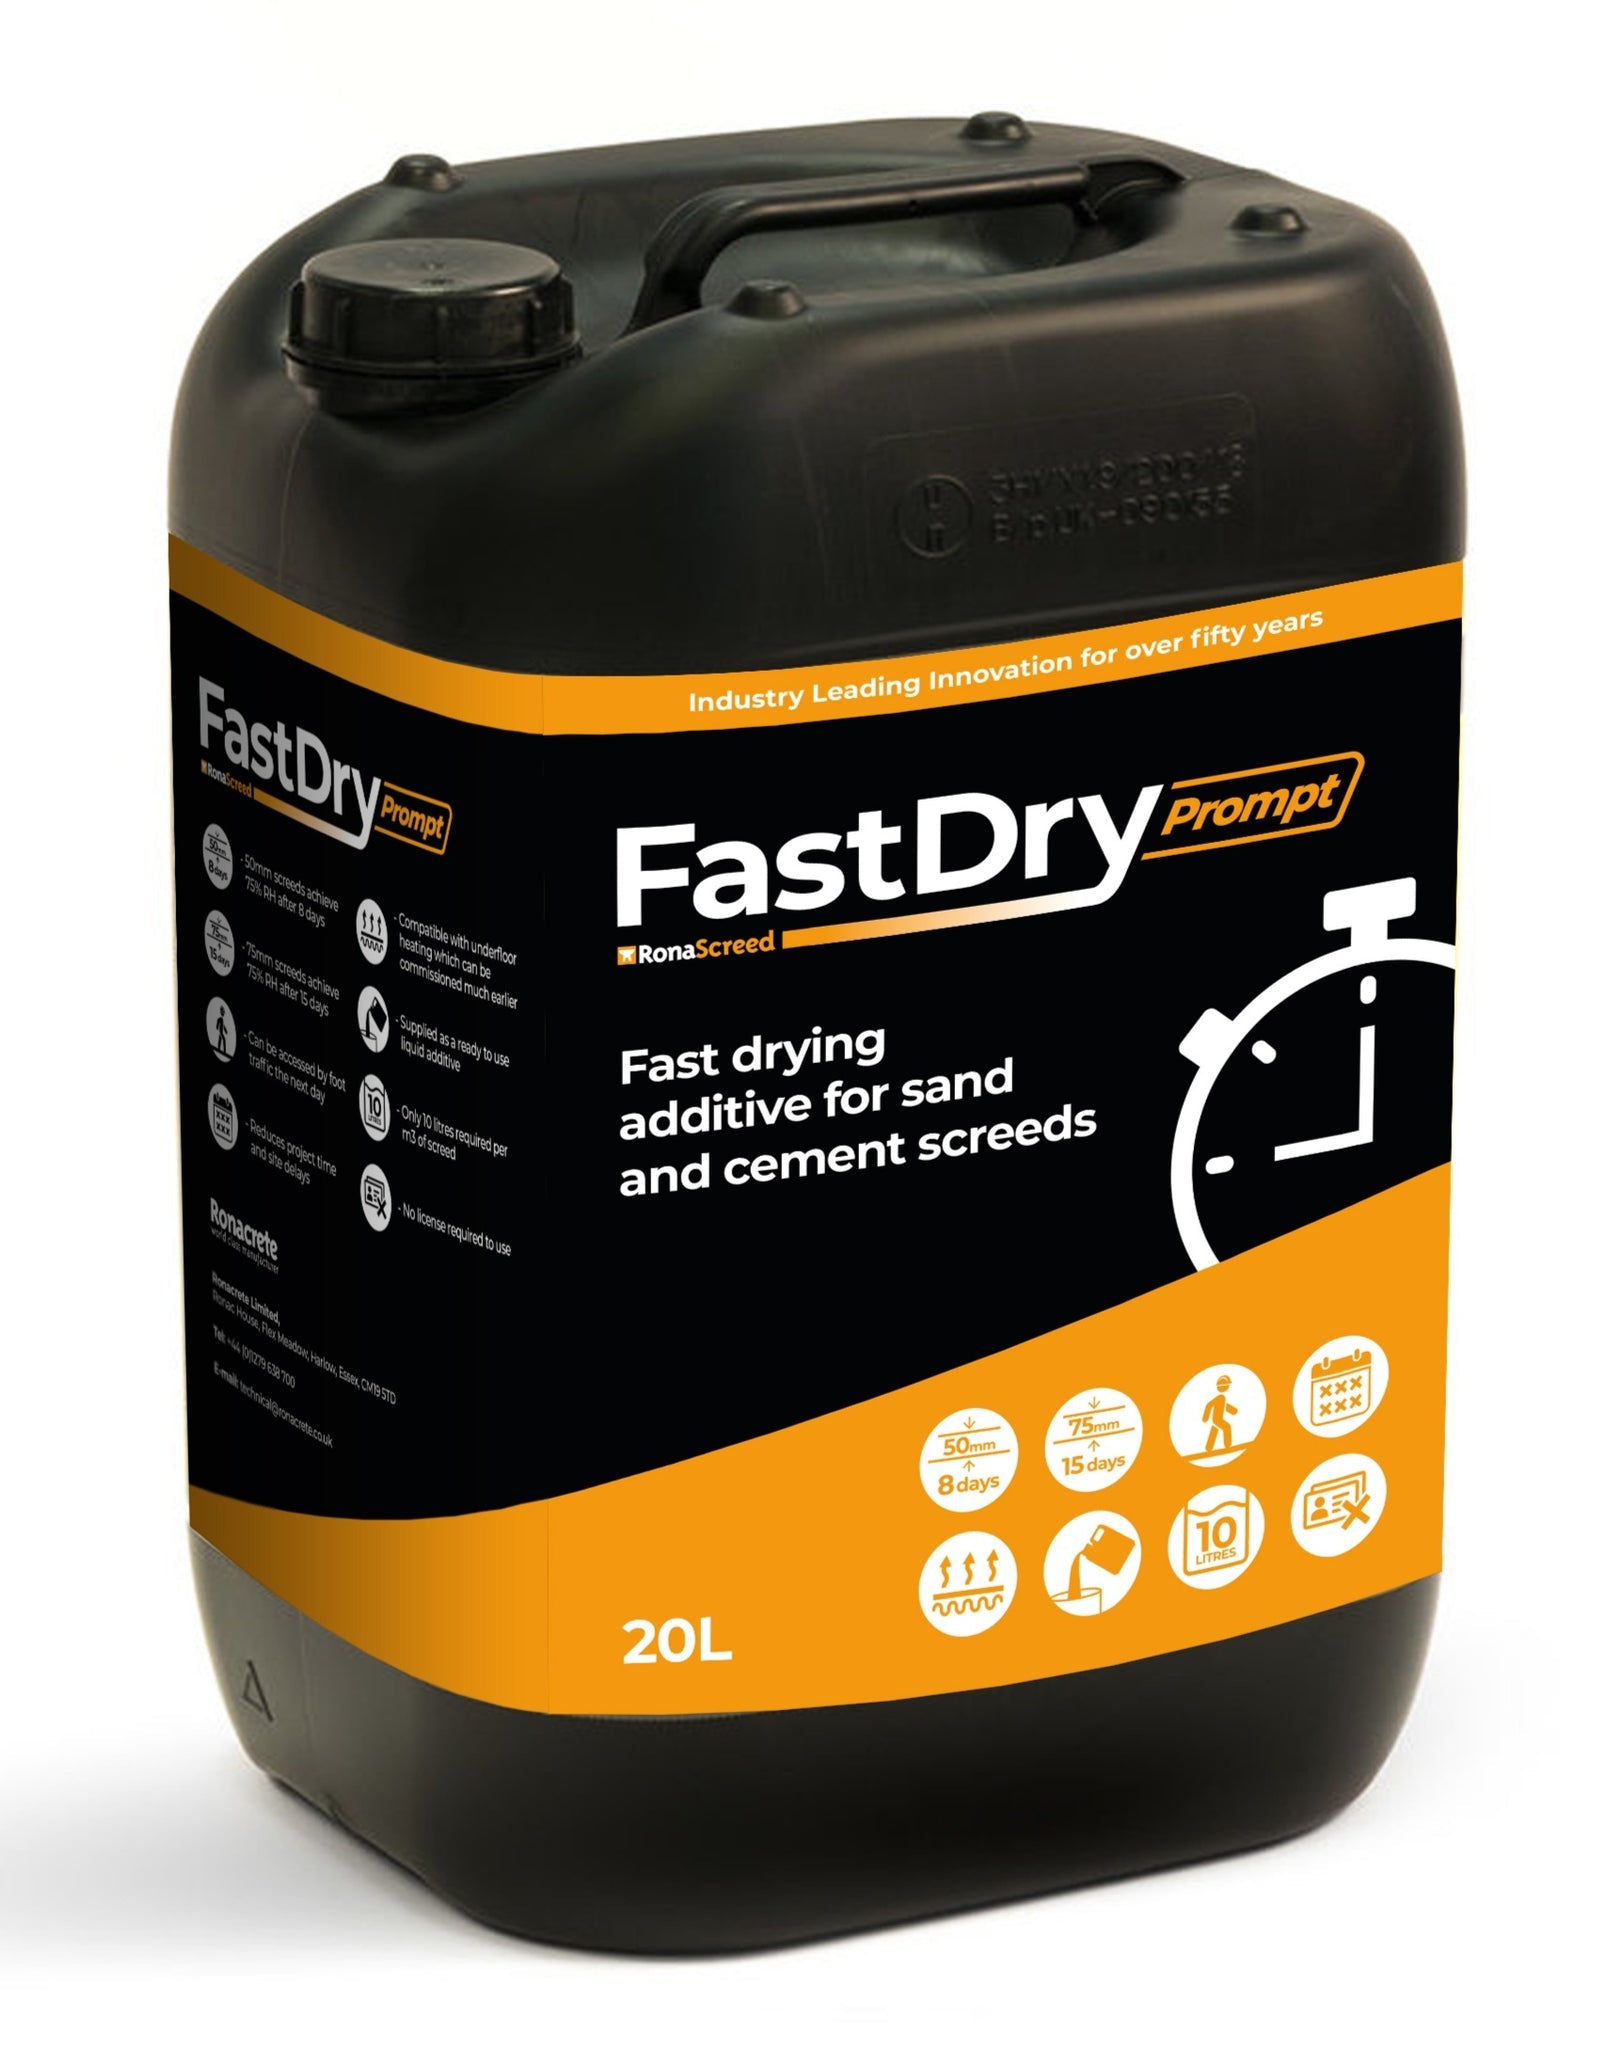 RonaScreed FastDry Prompt - Fast-drying screed additive -  20 Litres